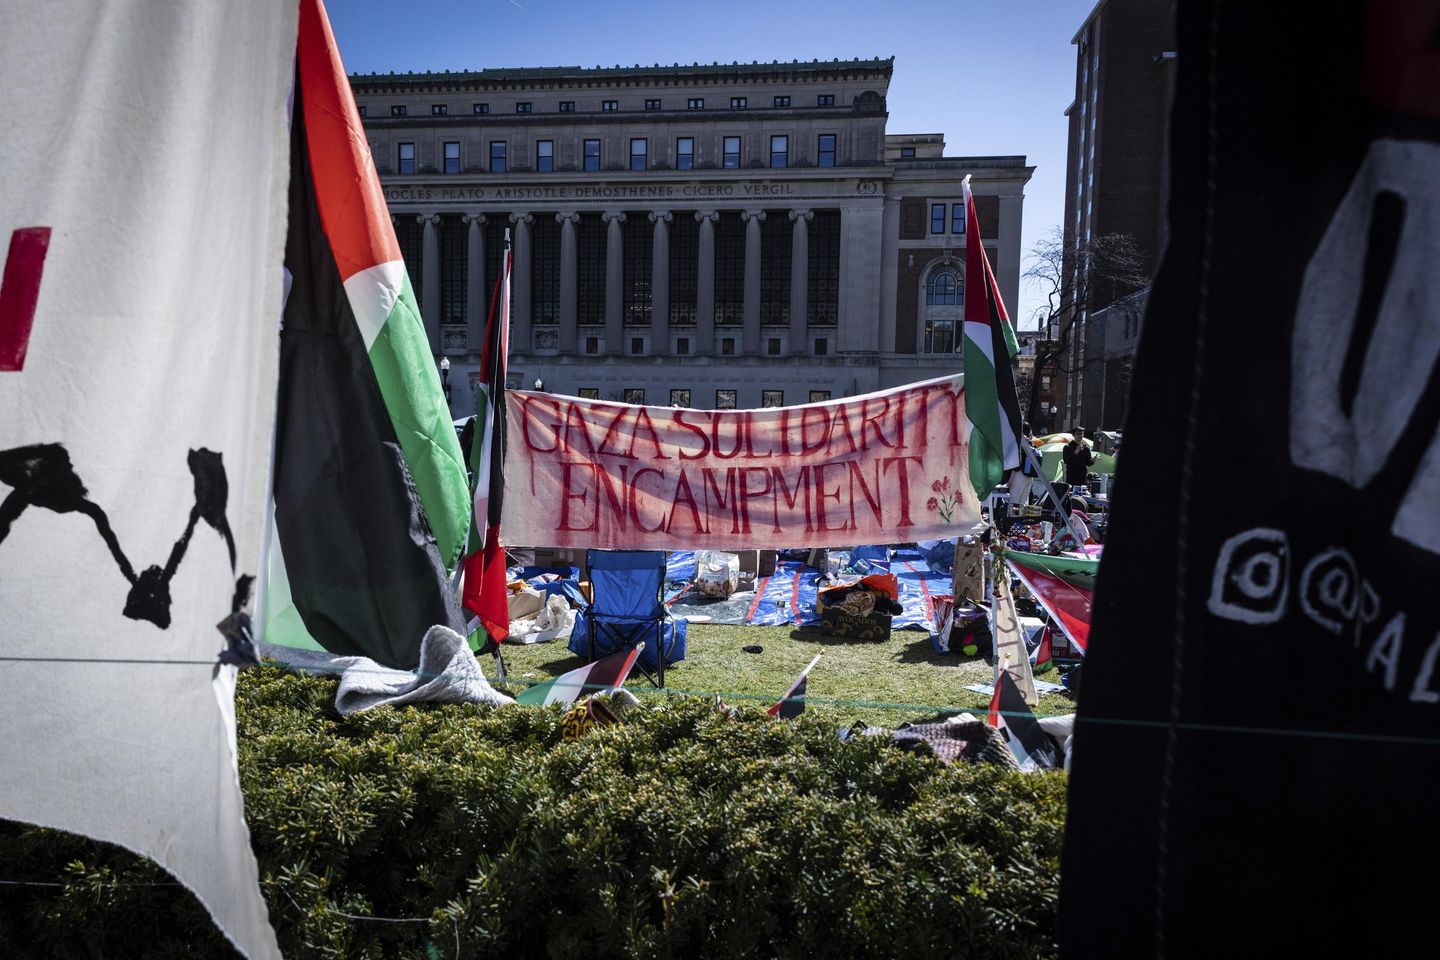 Rep. Omar cheers Columbia protesters for 'bravery and courage' after visiting anti-Israel encampment
